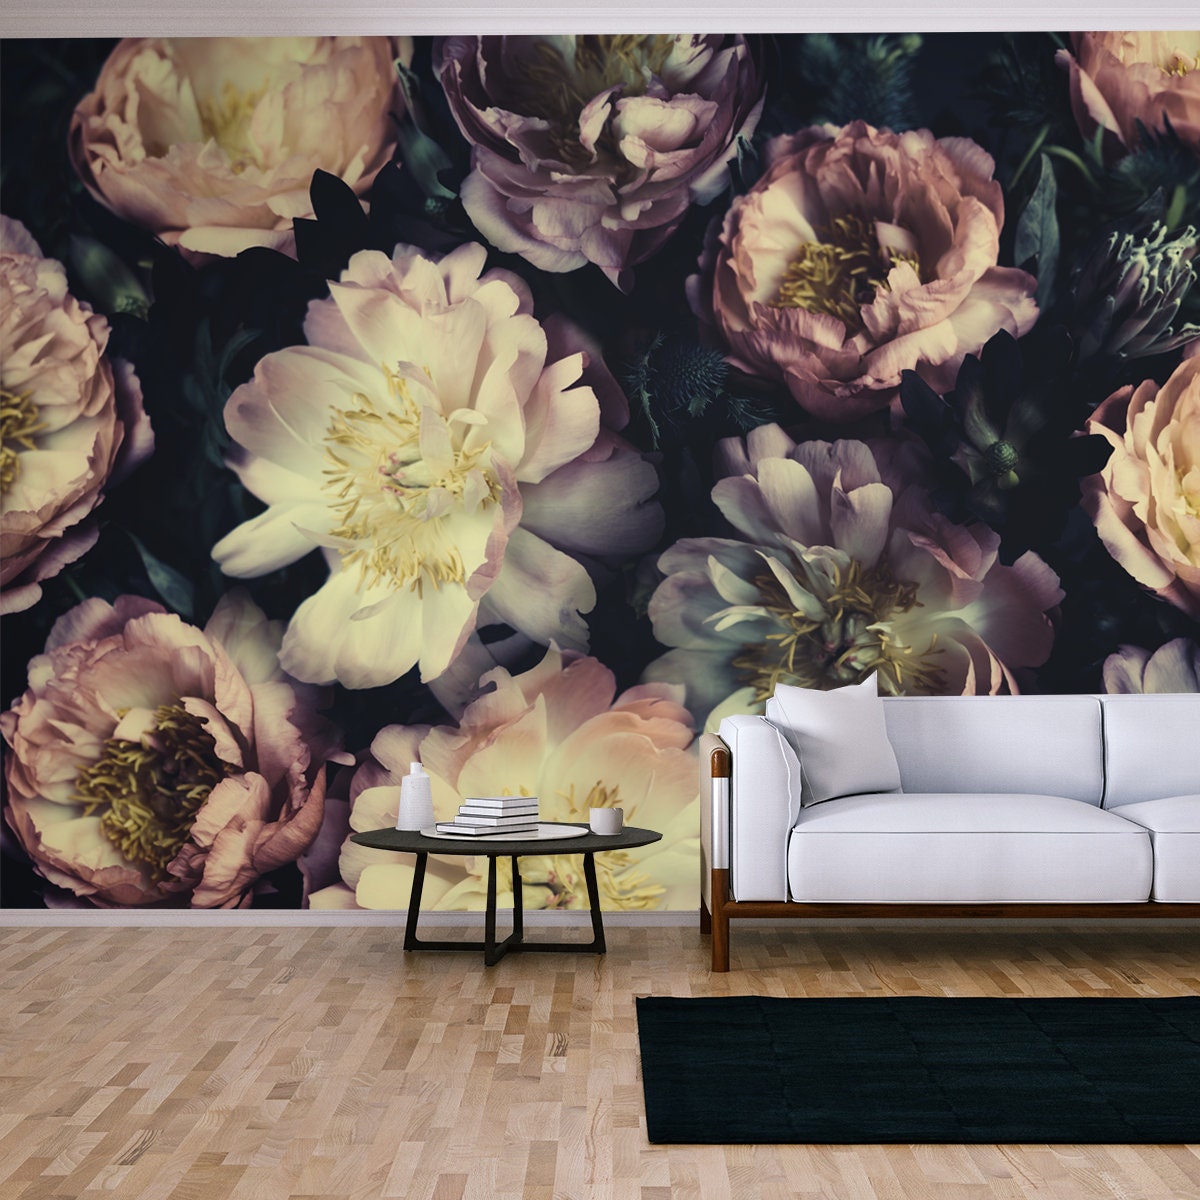 Vintage Bouquet of Beautiful Pale Peonies on Black. Floristic Decoration. Floral Background. Baroque Old Fashion Style Living Room Mural